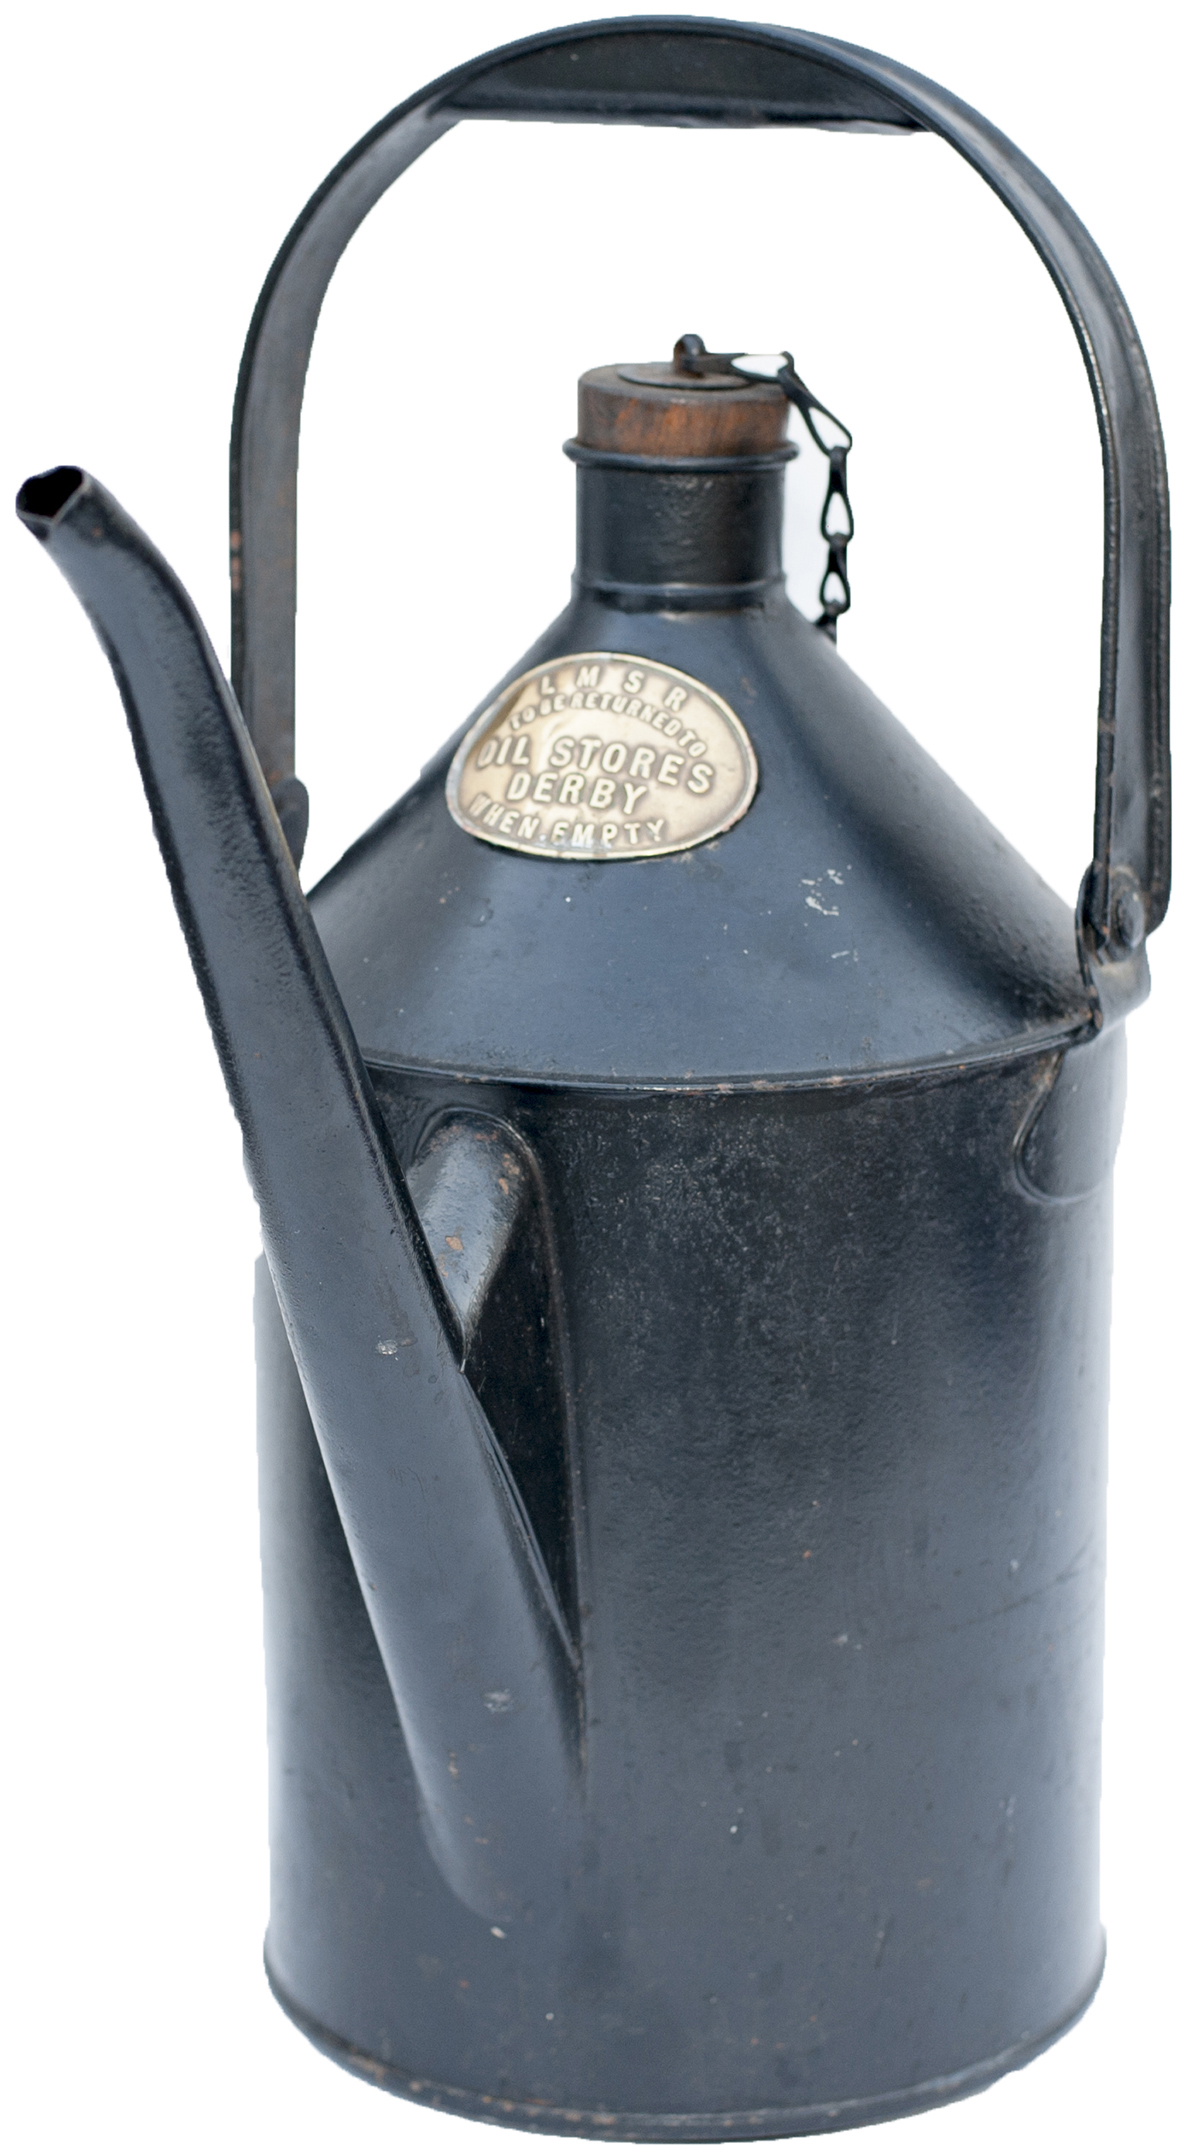 LMS oil can with carrying handle and long pouring spout. Brass plated LMSR TO BE RETURNED TO OIL